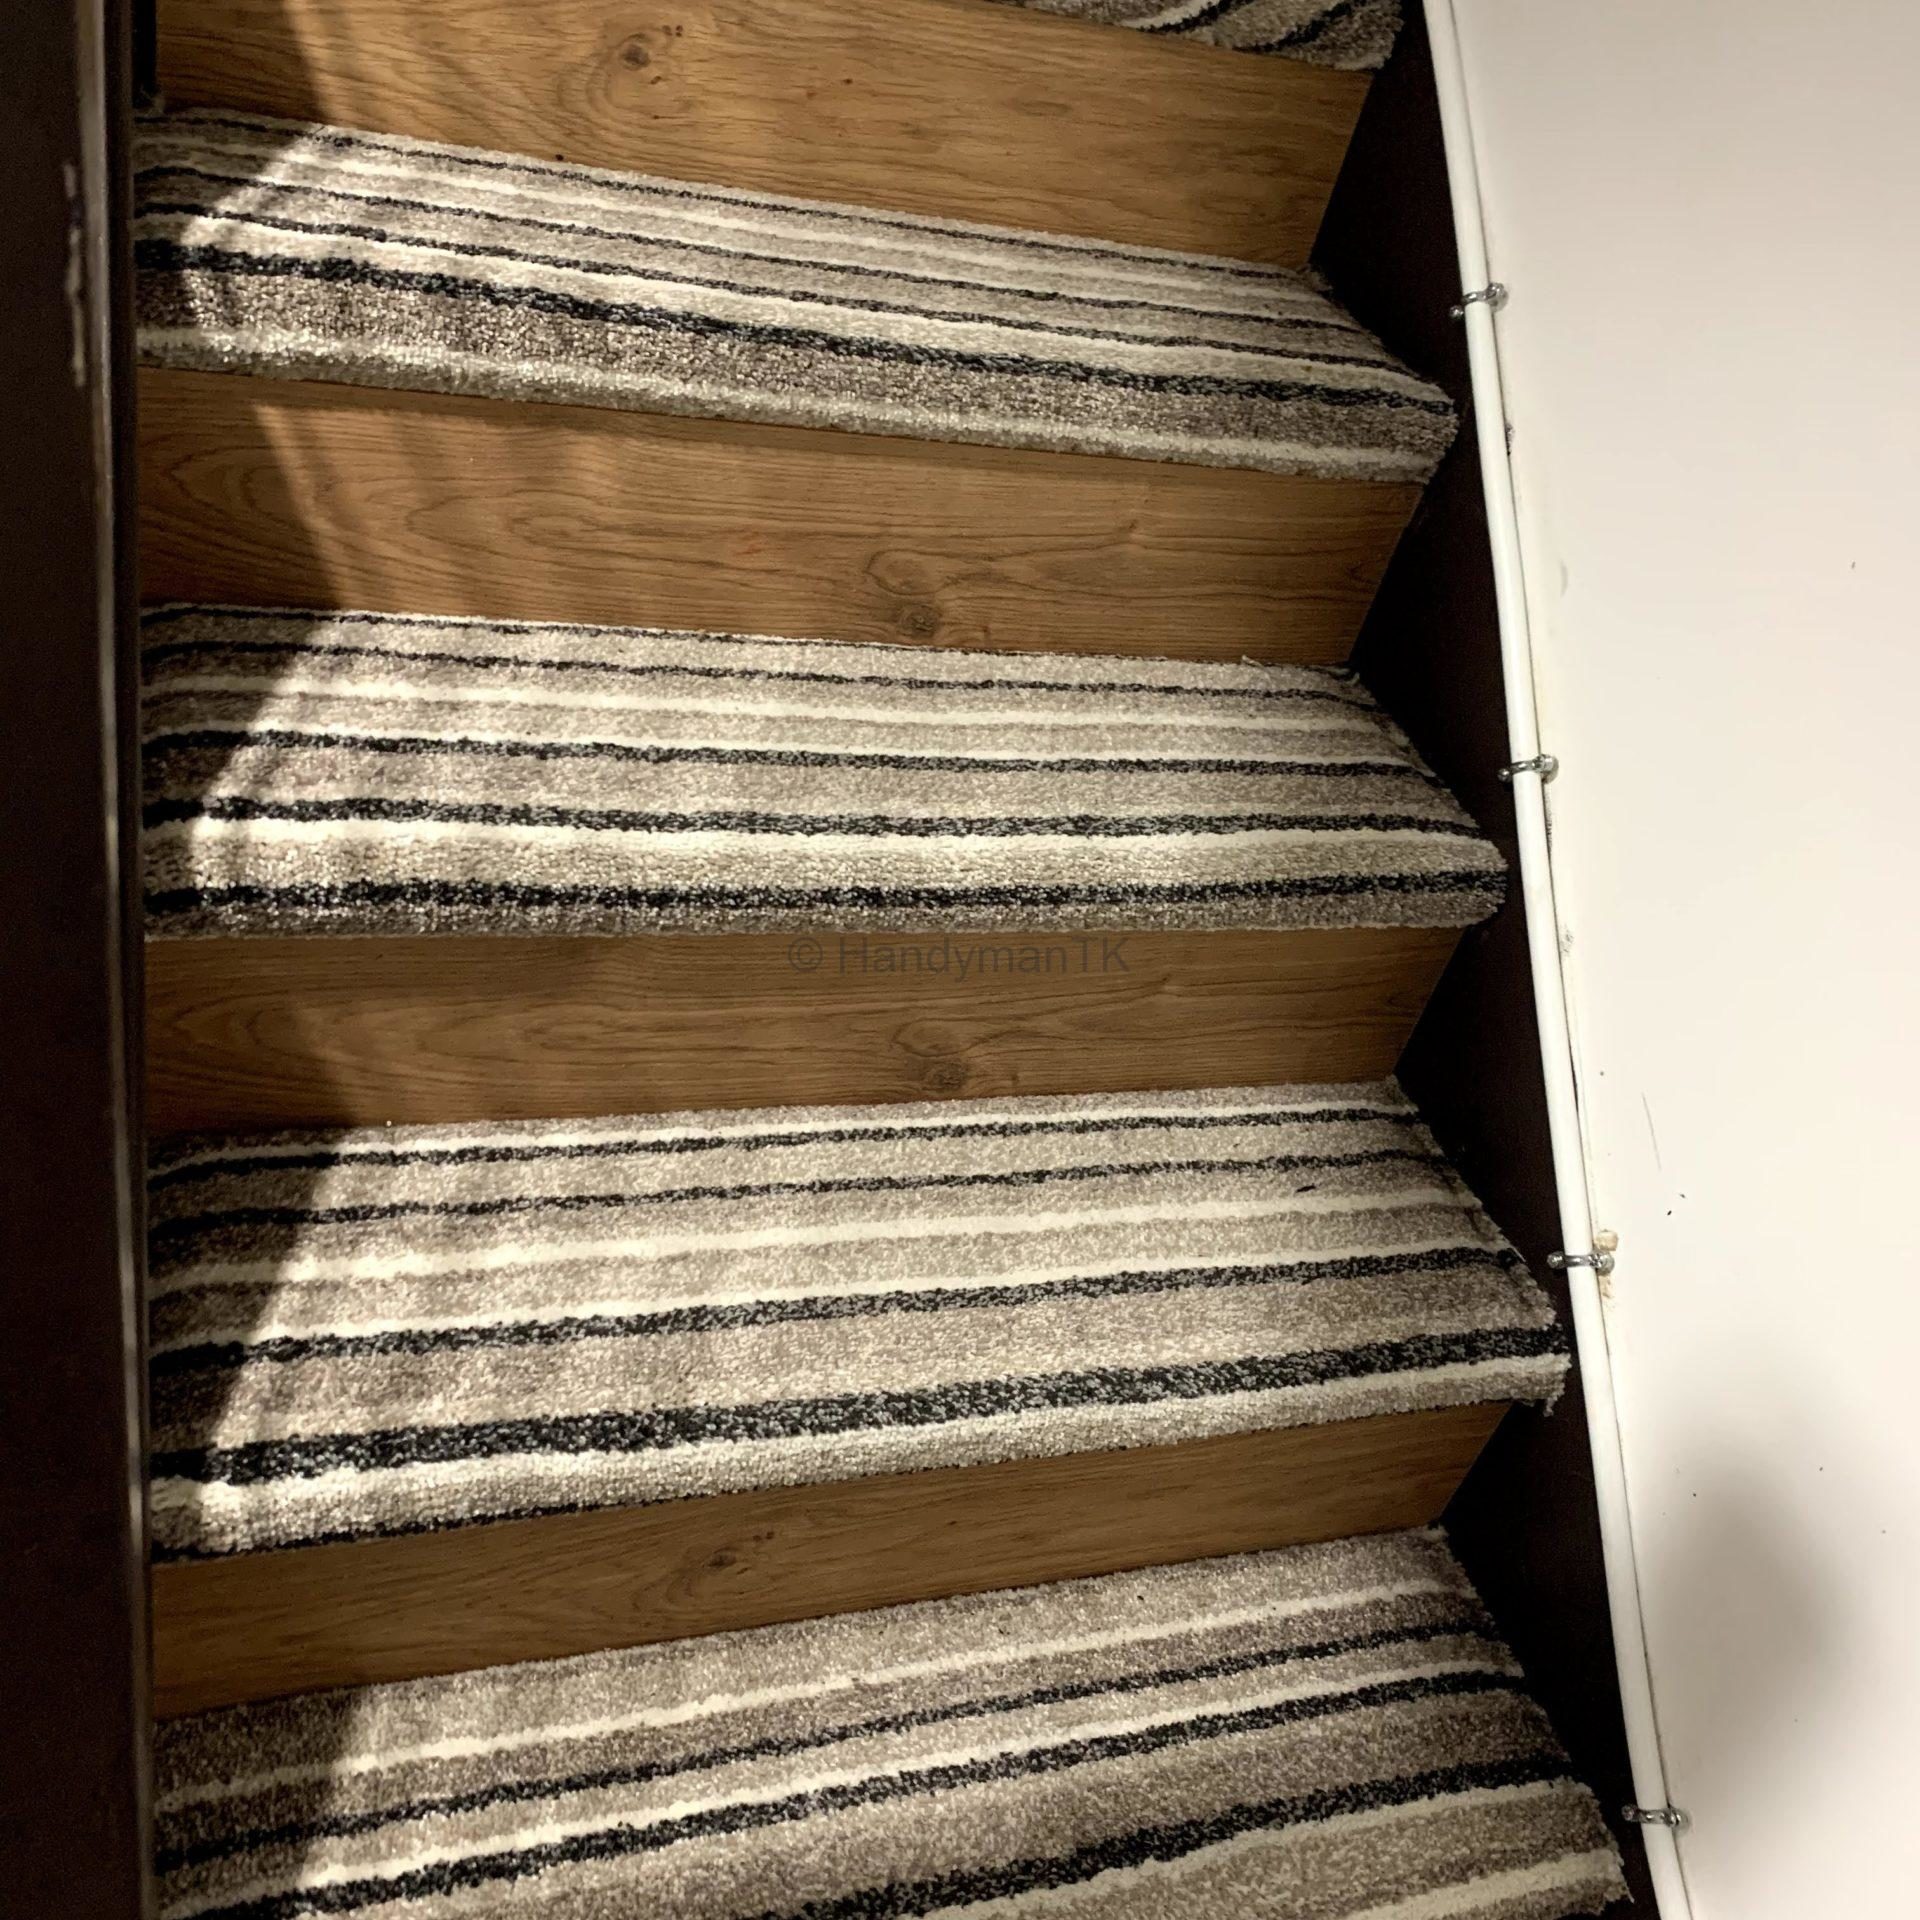 New carpeted stairs